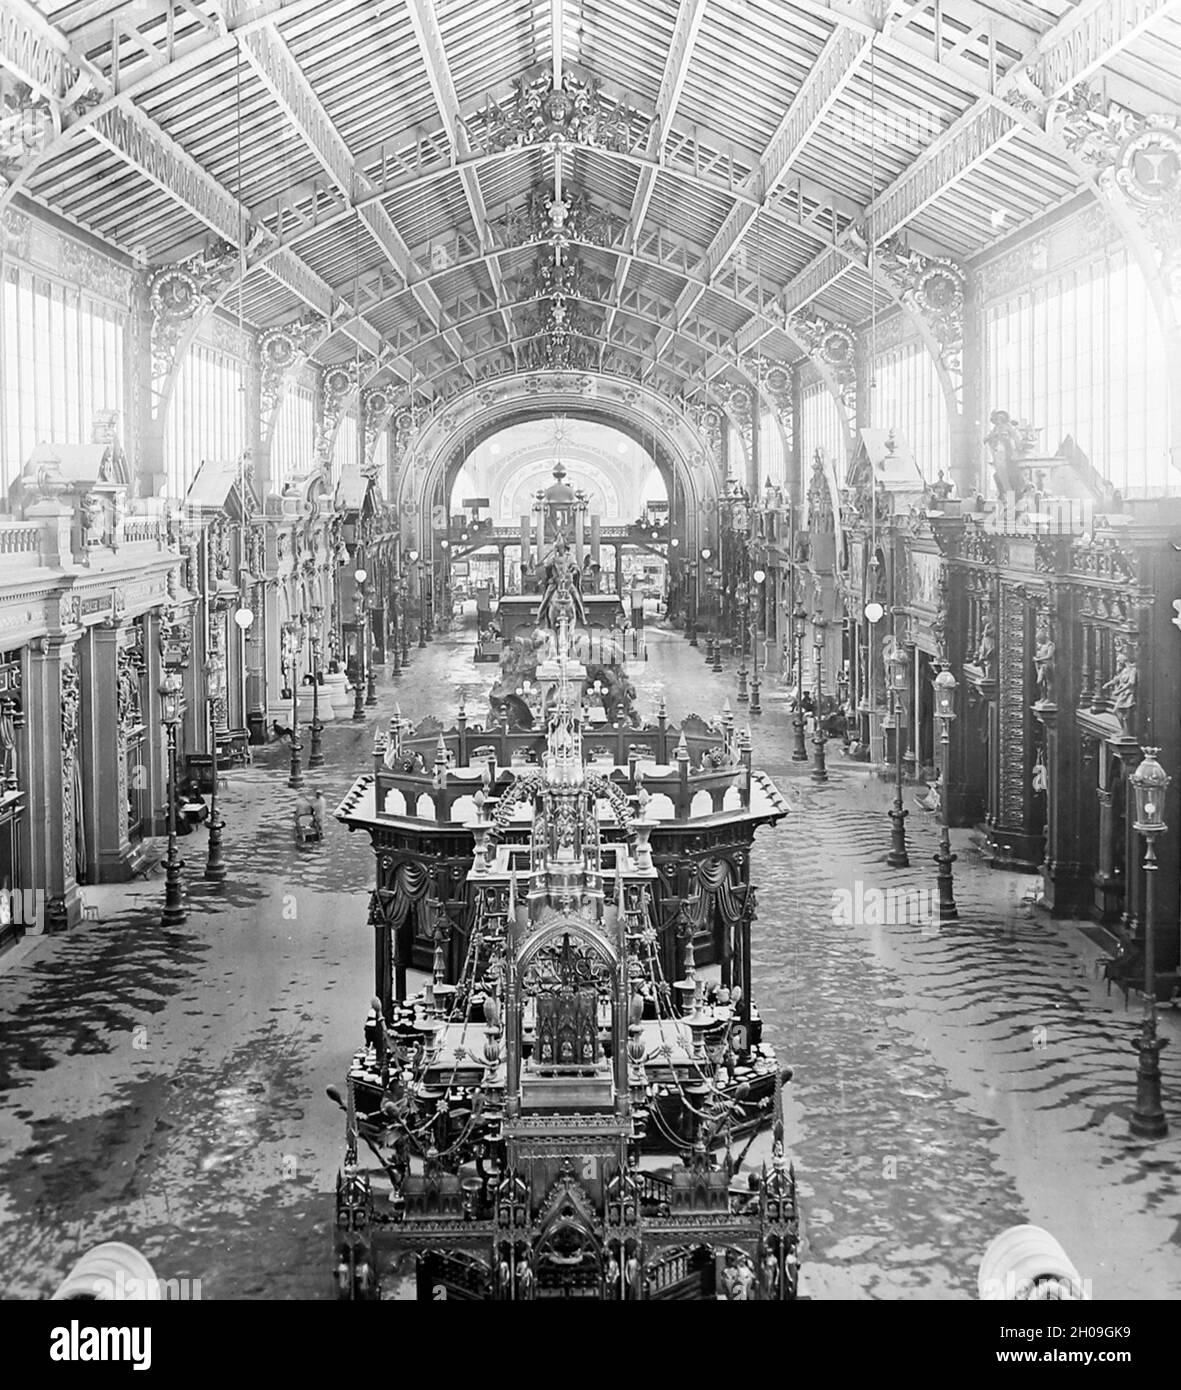 The Nave, Exposition Universelle, Paris, 1889 Stock Photo